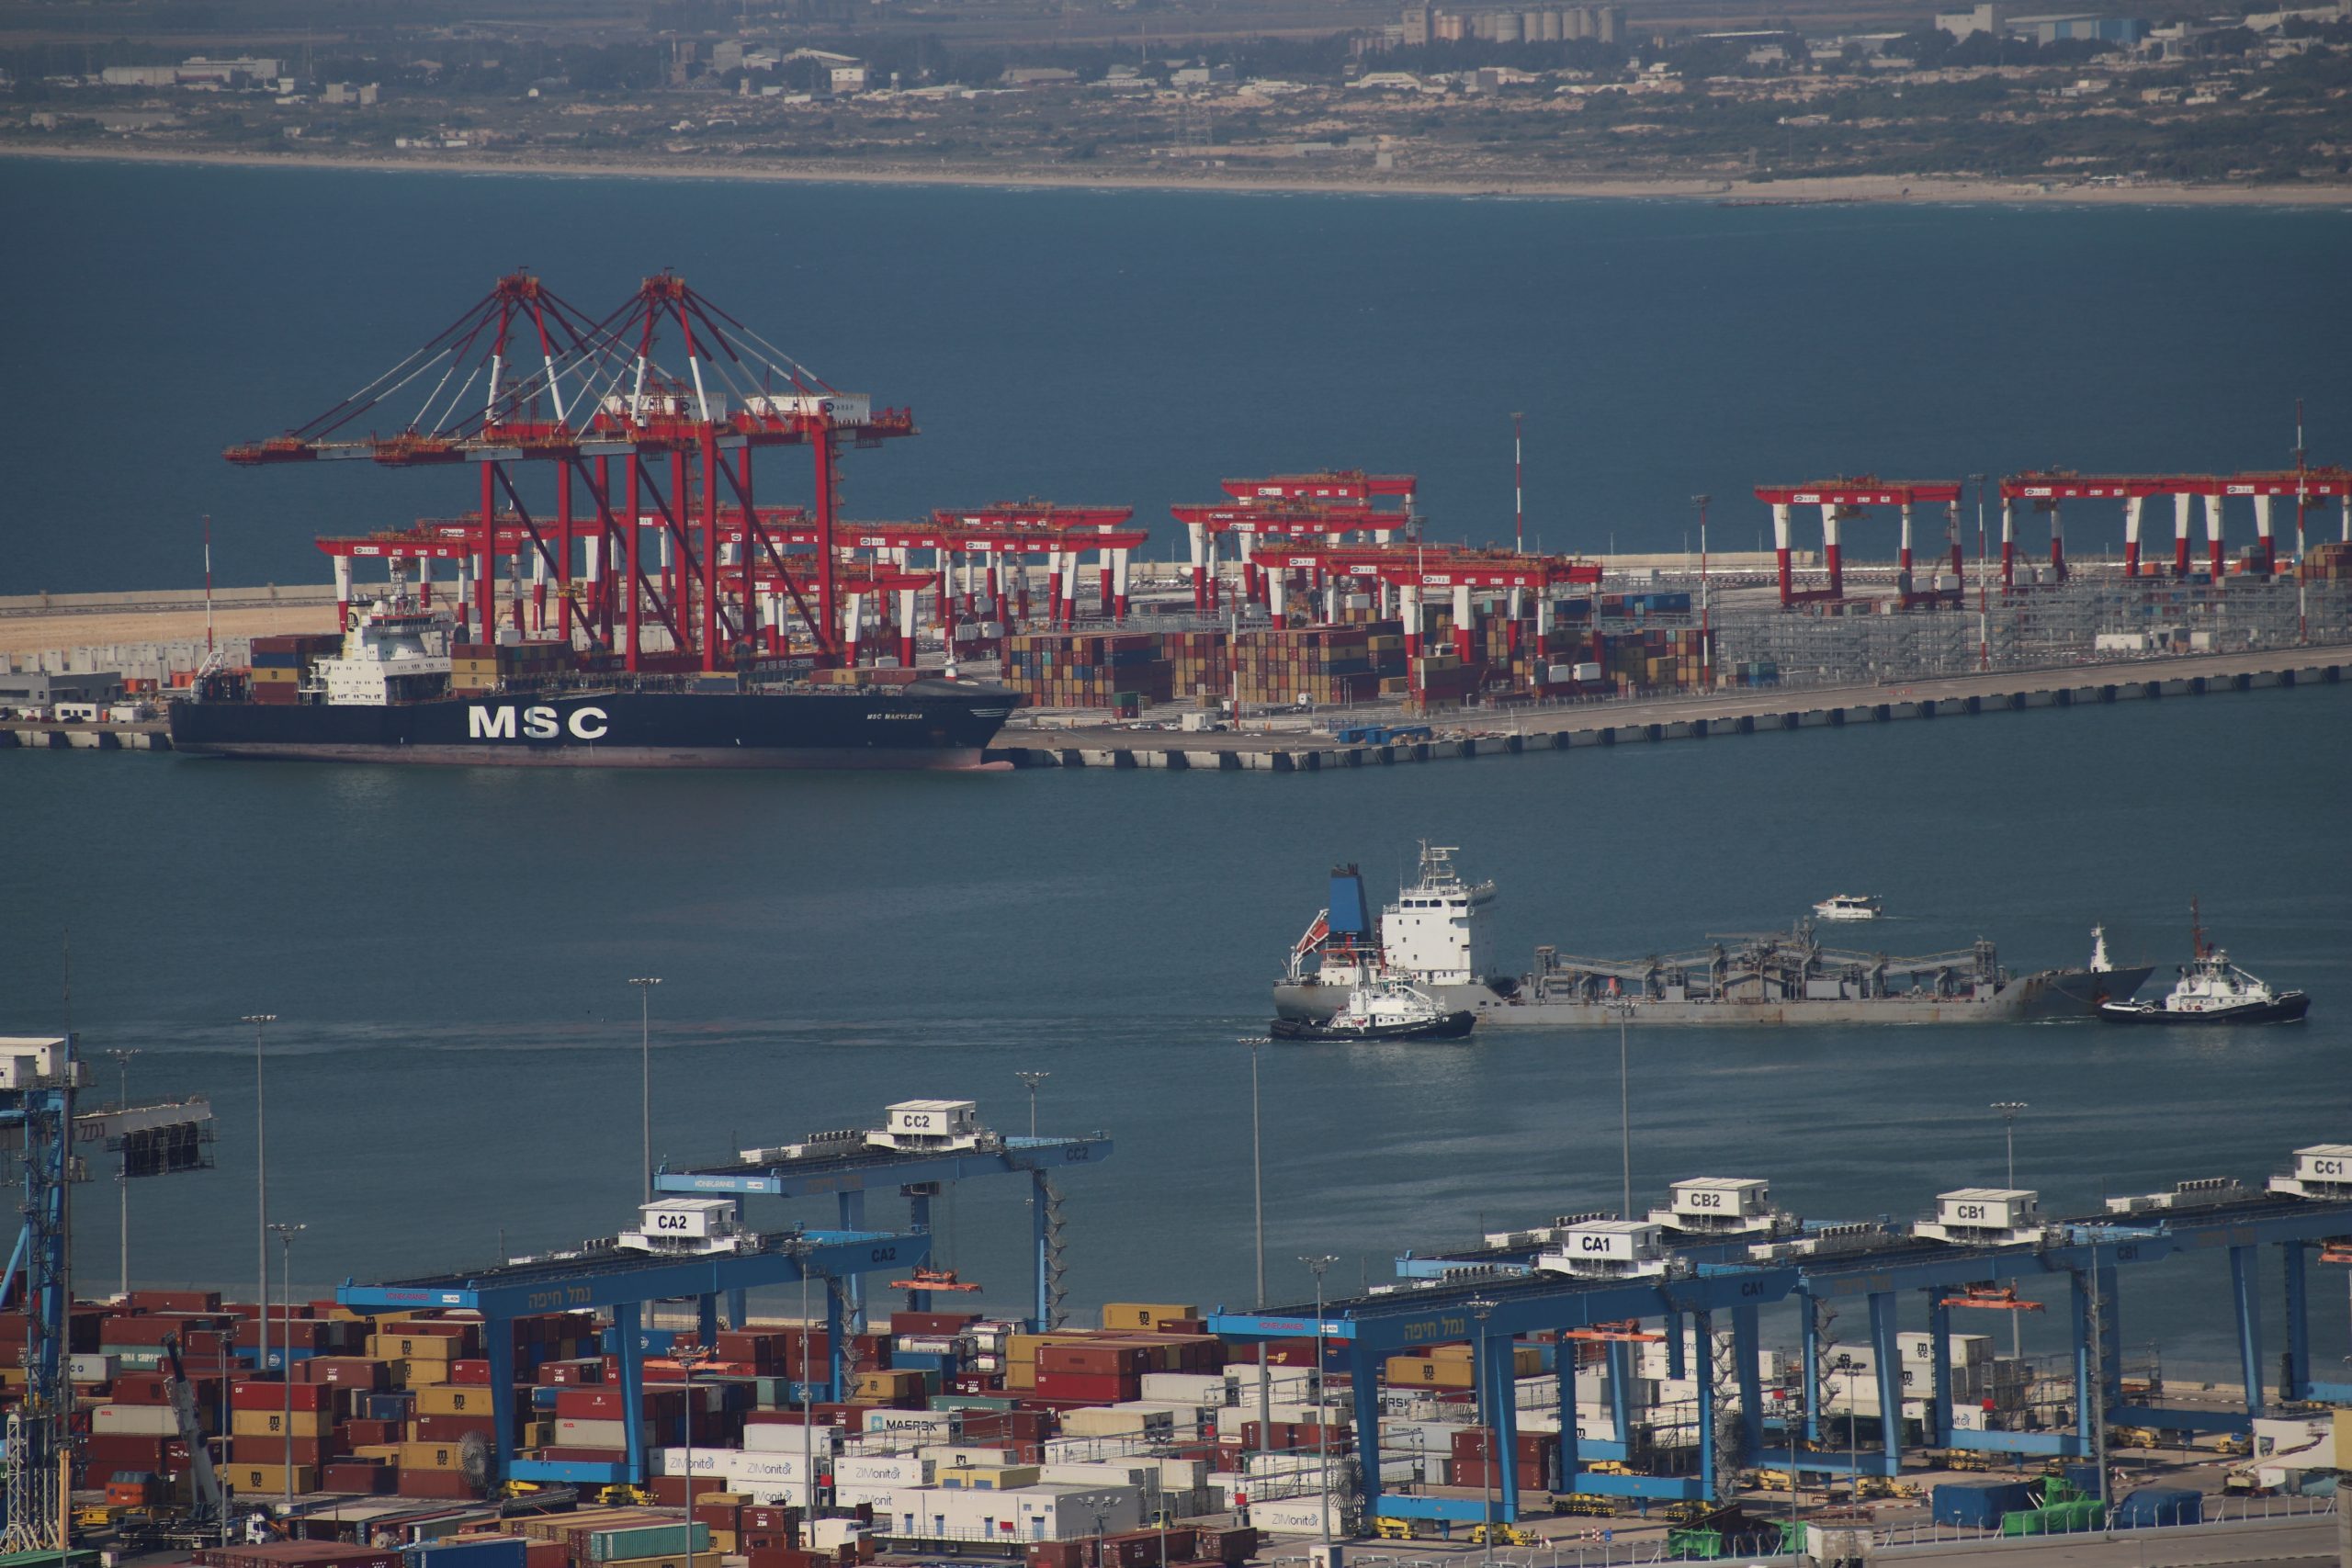 MSC Marylena is the first ship loaded in a new Bay Port in Haifa